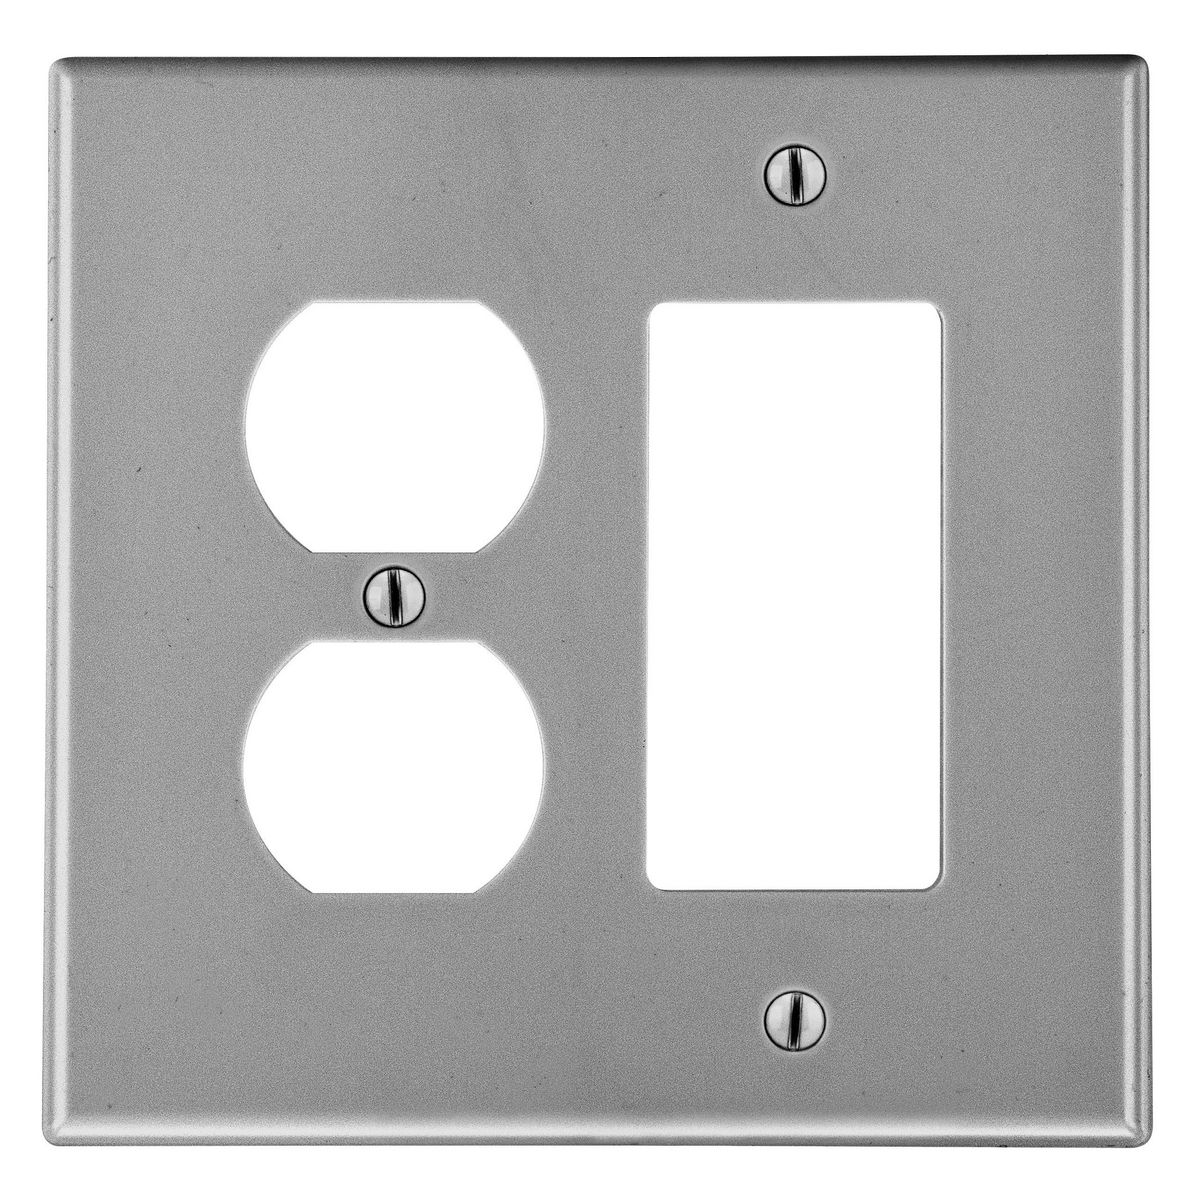 2 Gang Commercial-Grade Stainless Steel Water-Resistant Wallplate